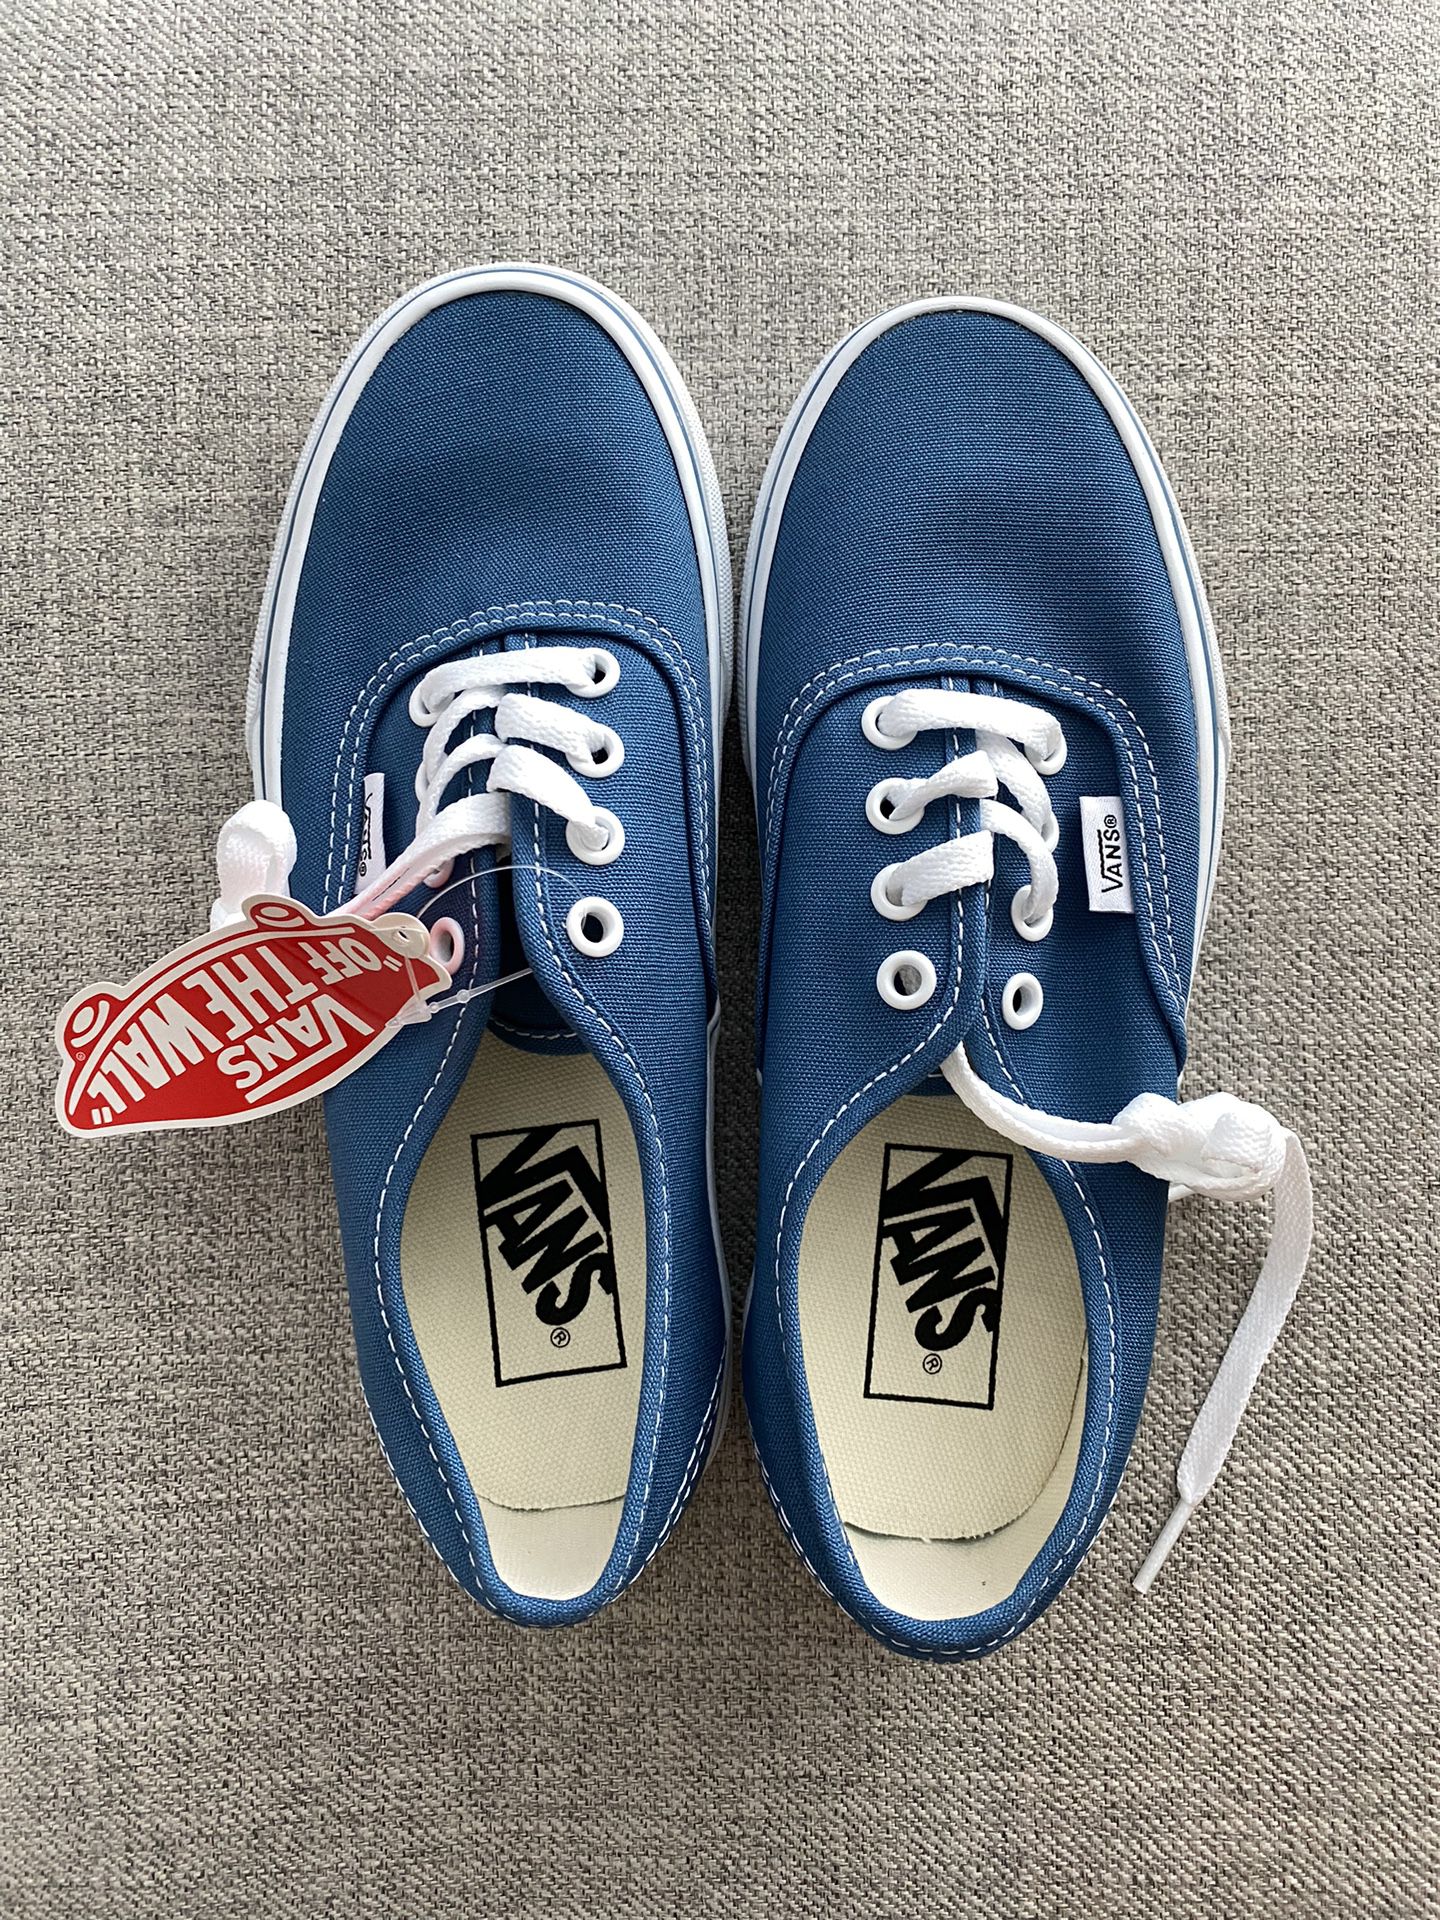 Youth Size 4 Brand New Vans 